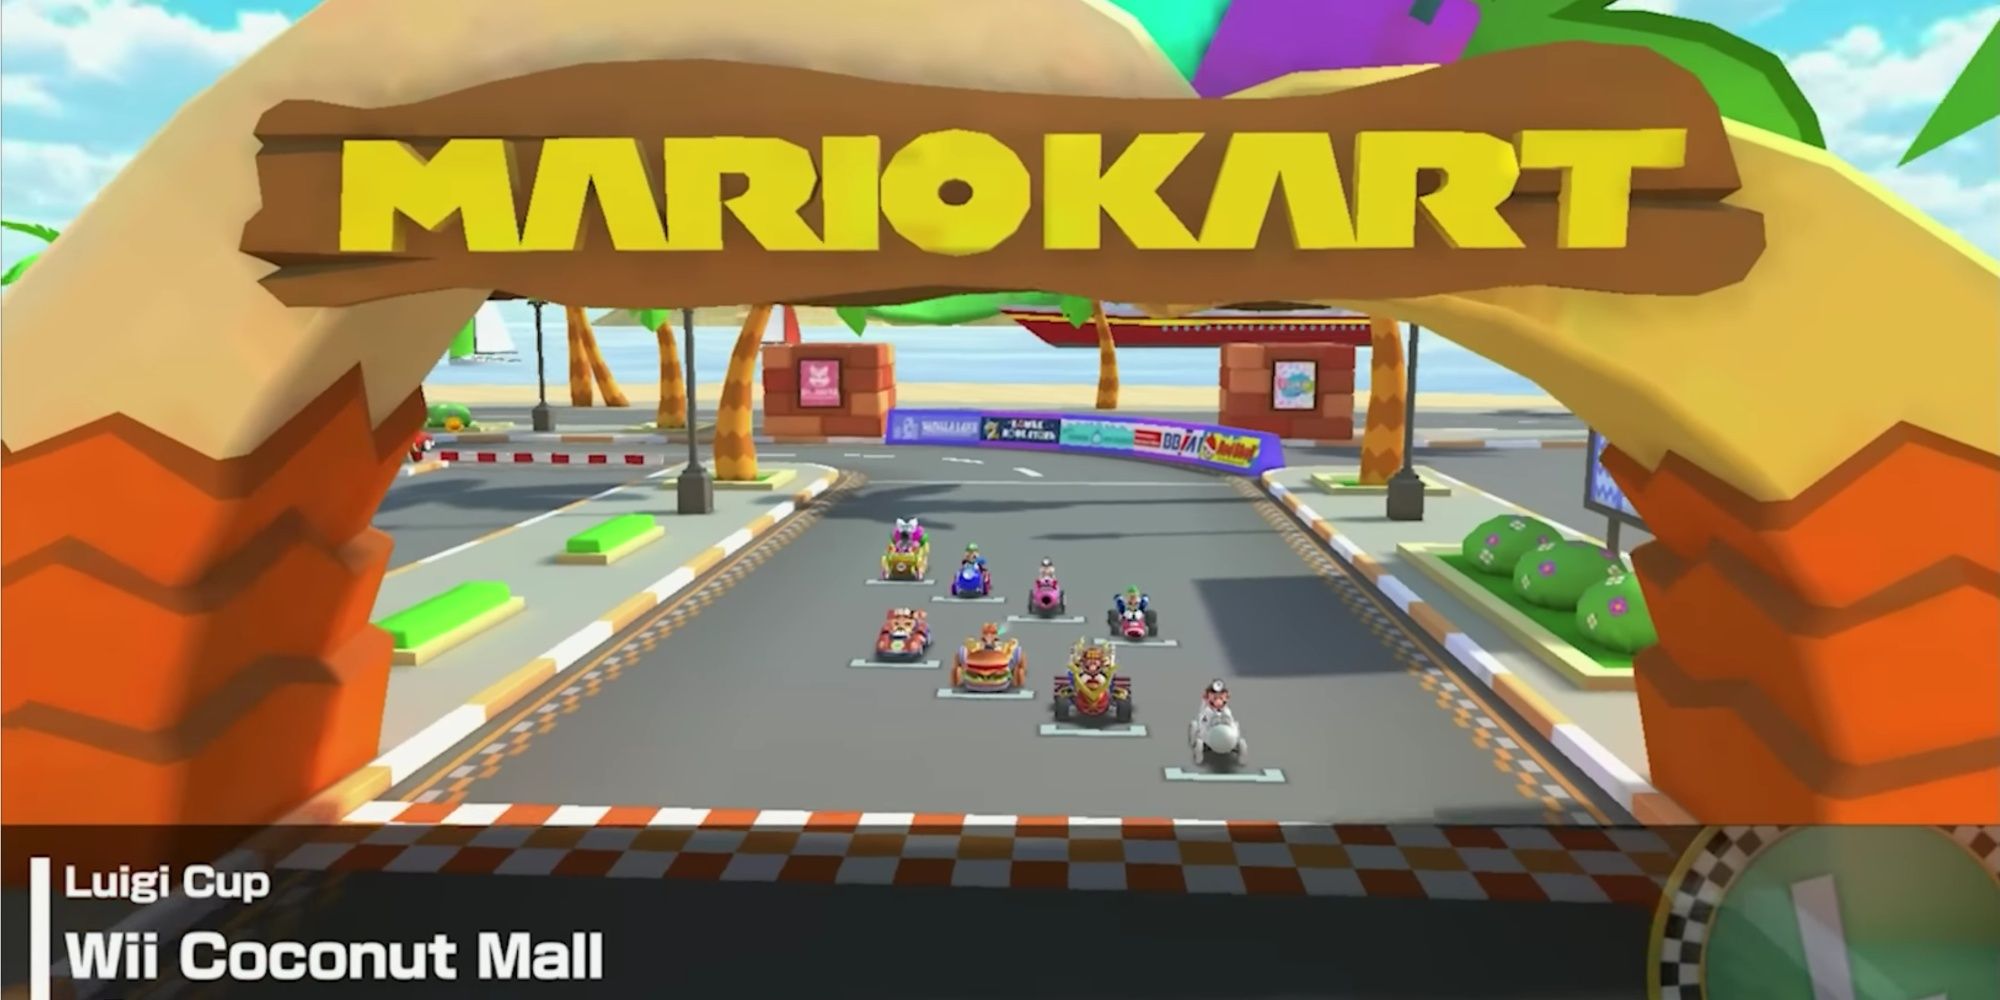 Screenshot from the opening of the race on the Wii track Coconut Mall with all racers lined up in the mobile Mario Kart Tour version.